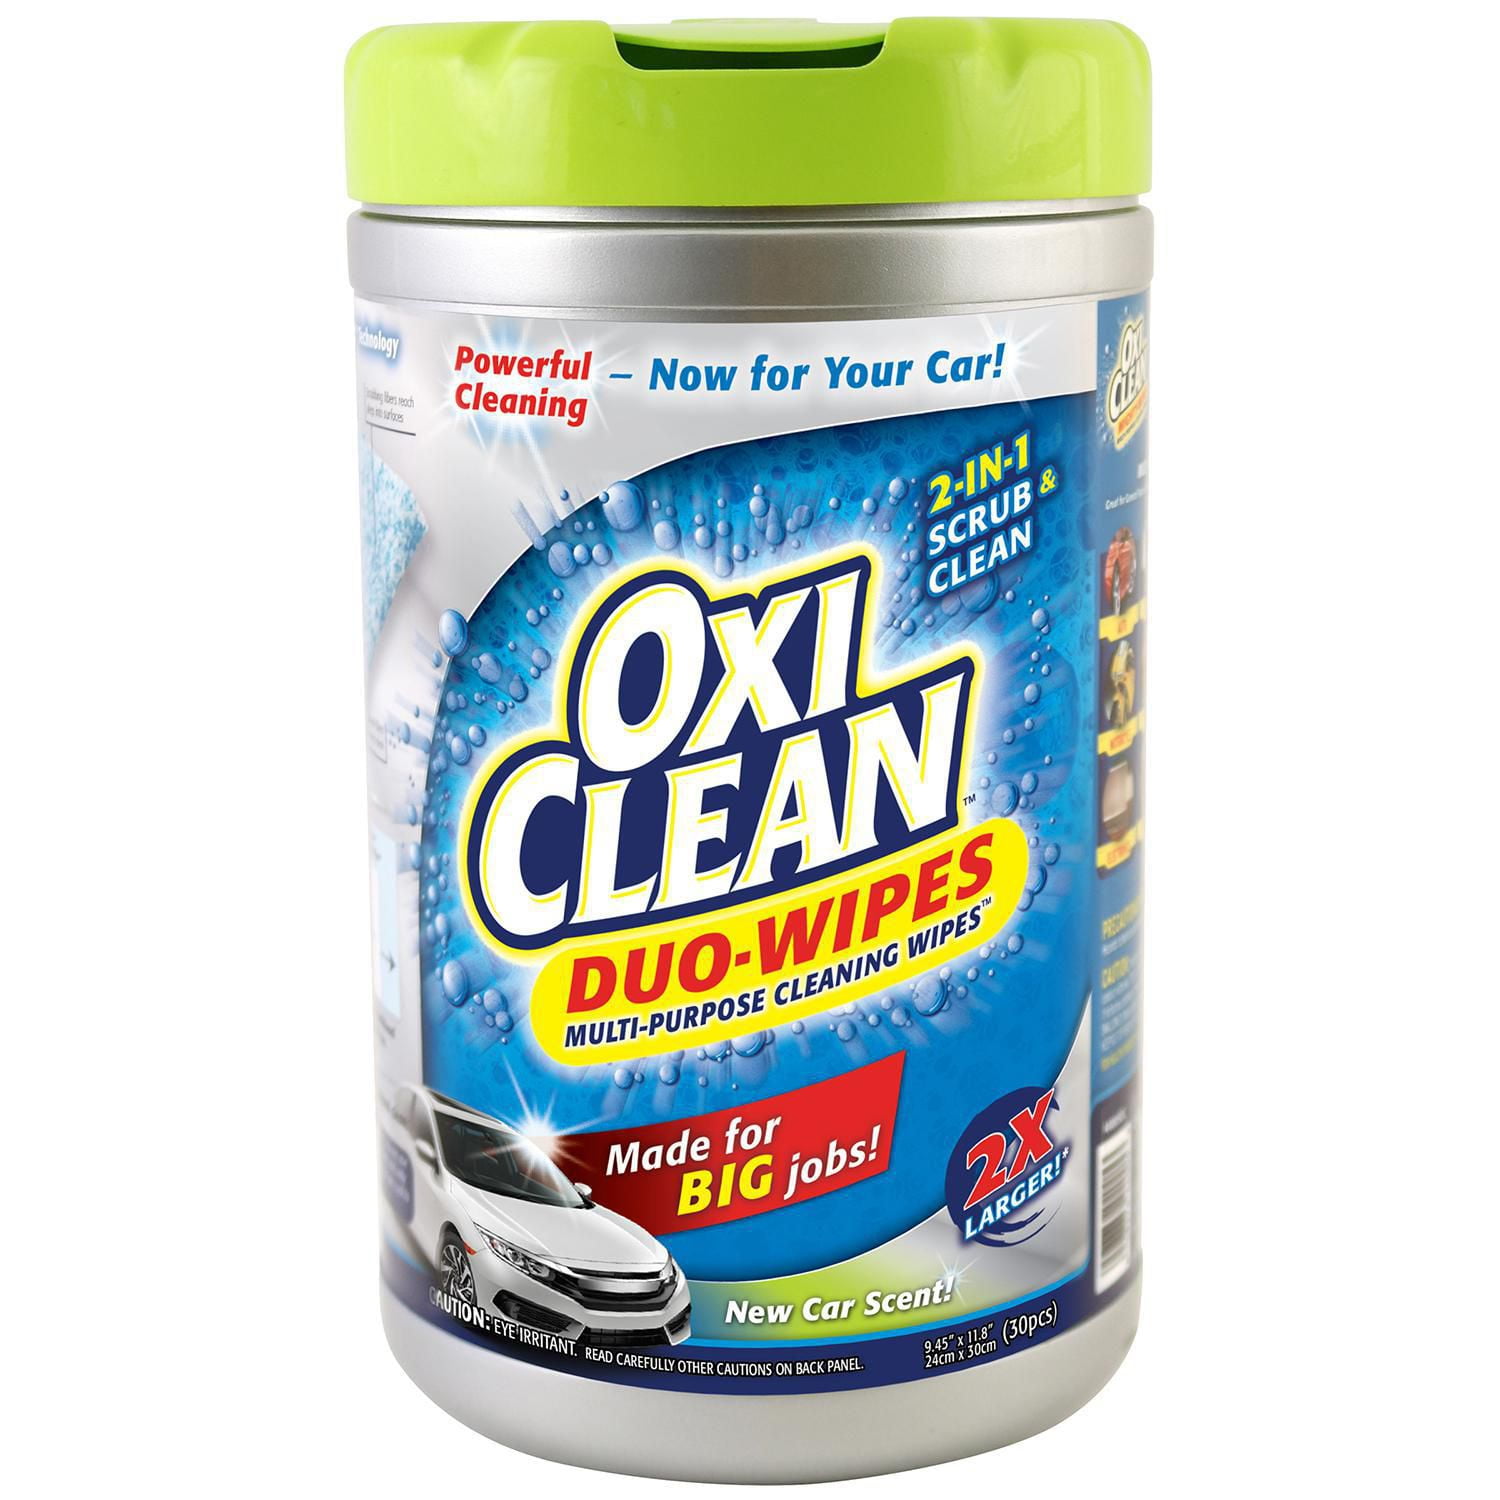 Car Interior Cleaning Wipes (60 pcs) - Hoopoe Oline Store